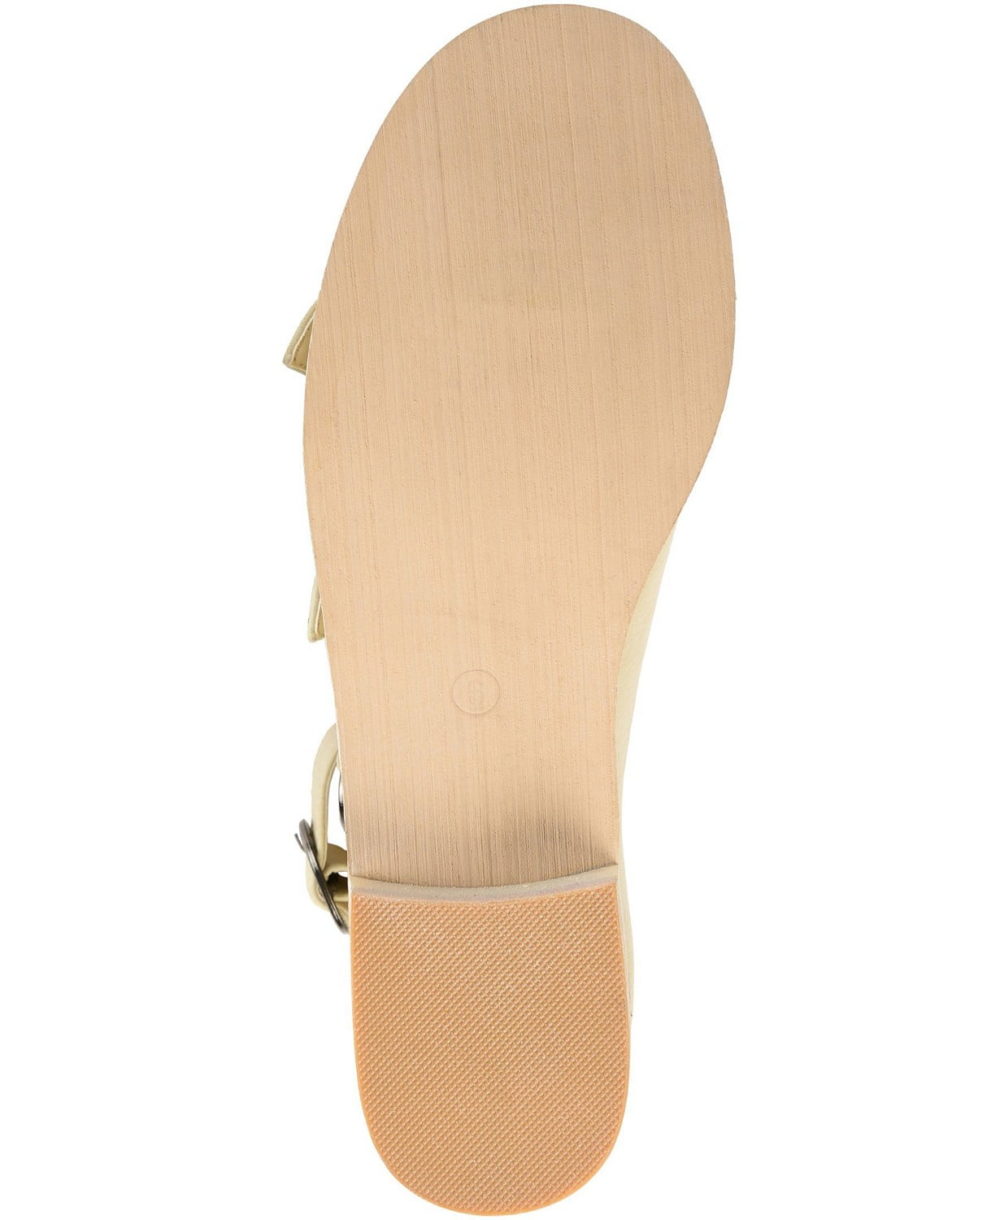 woocommerce-673321-2209615.cloudwaysapps.com-journee-collection-womens-beige-oakly-sandals